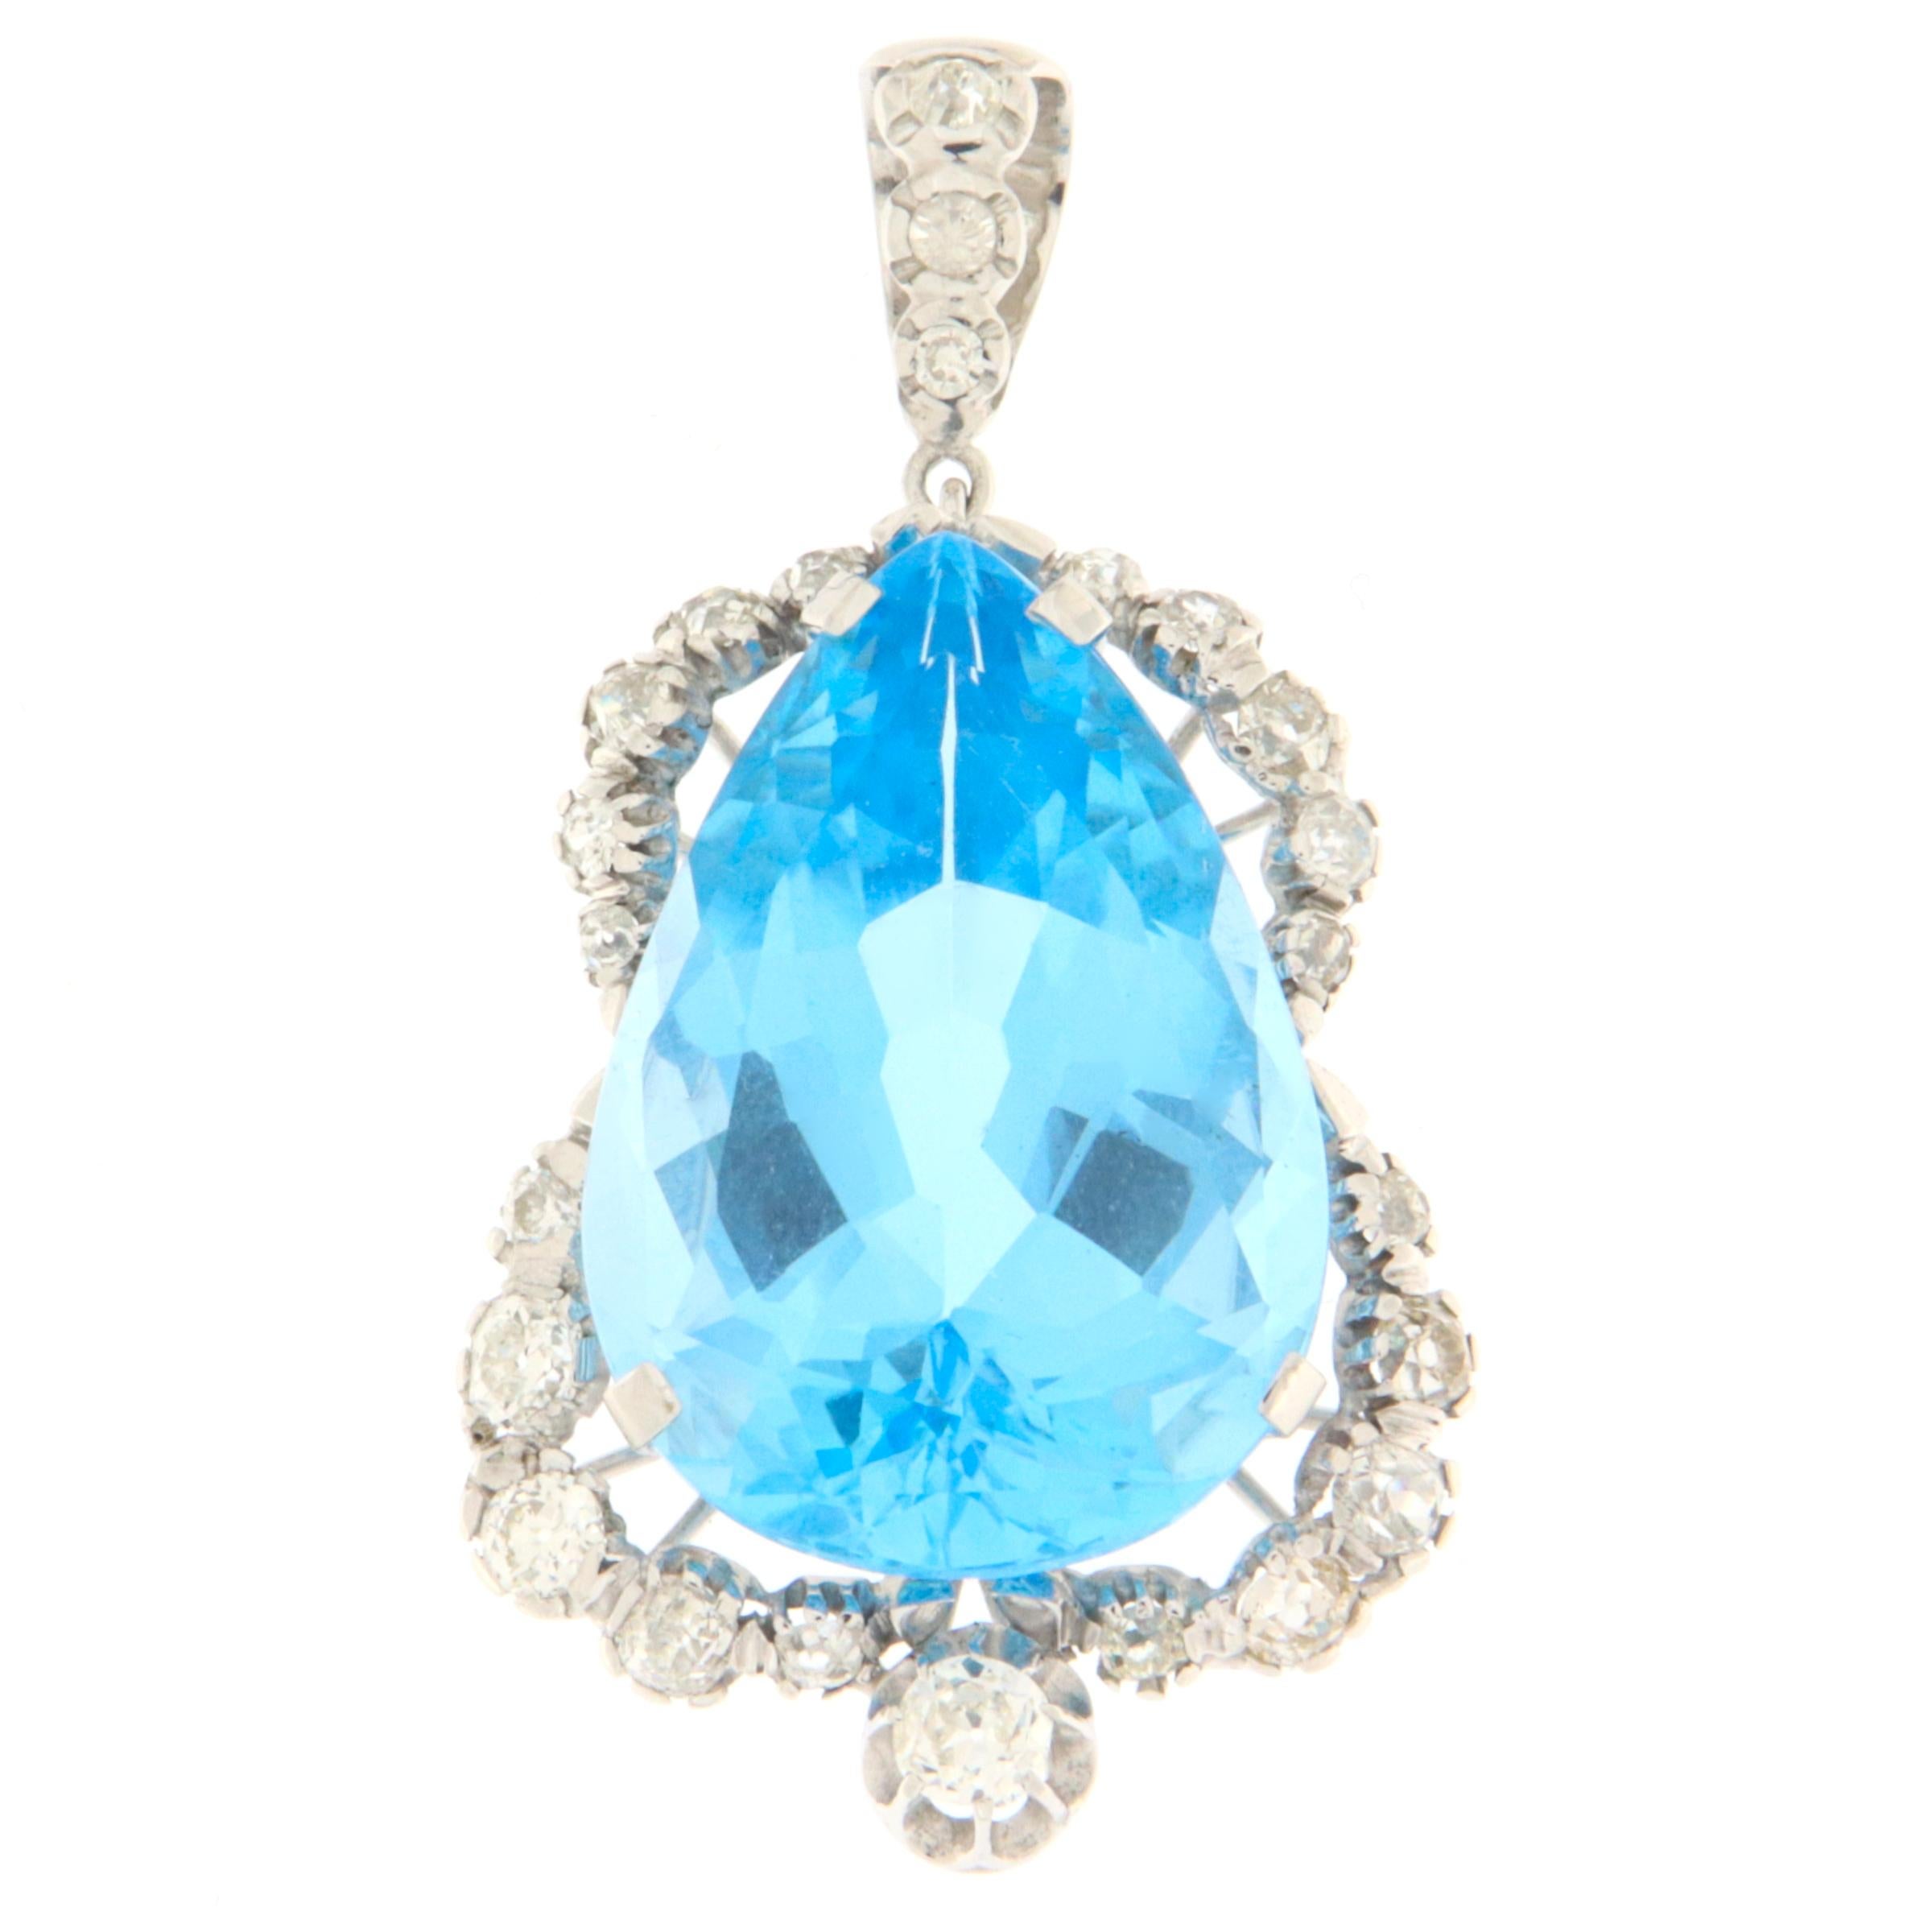 This elegant pendant in 18-karat white gold is a true embodiment of grace and splendor. At the heart of this creation lies a magnificent blue topaz, masterfully cut into a drop shape, capturing the essence of crystal-clear water and the endless sky.